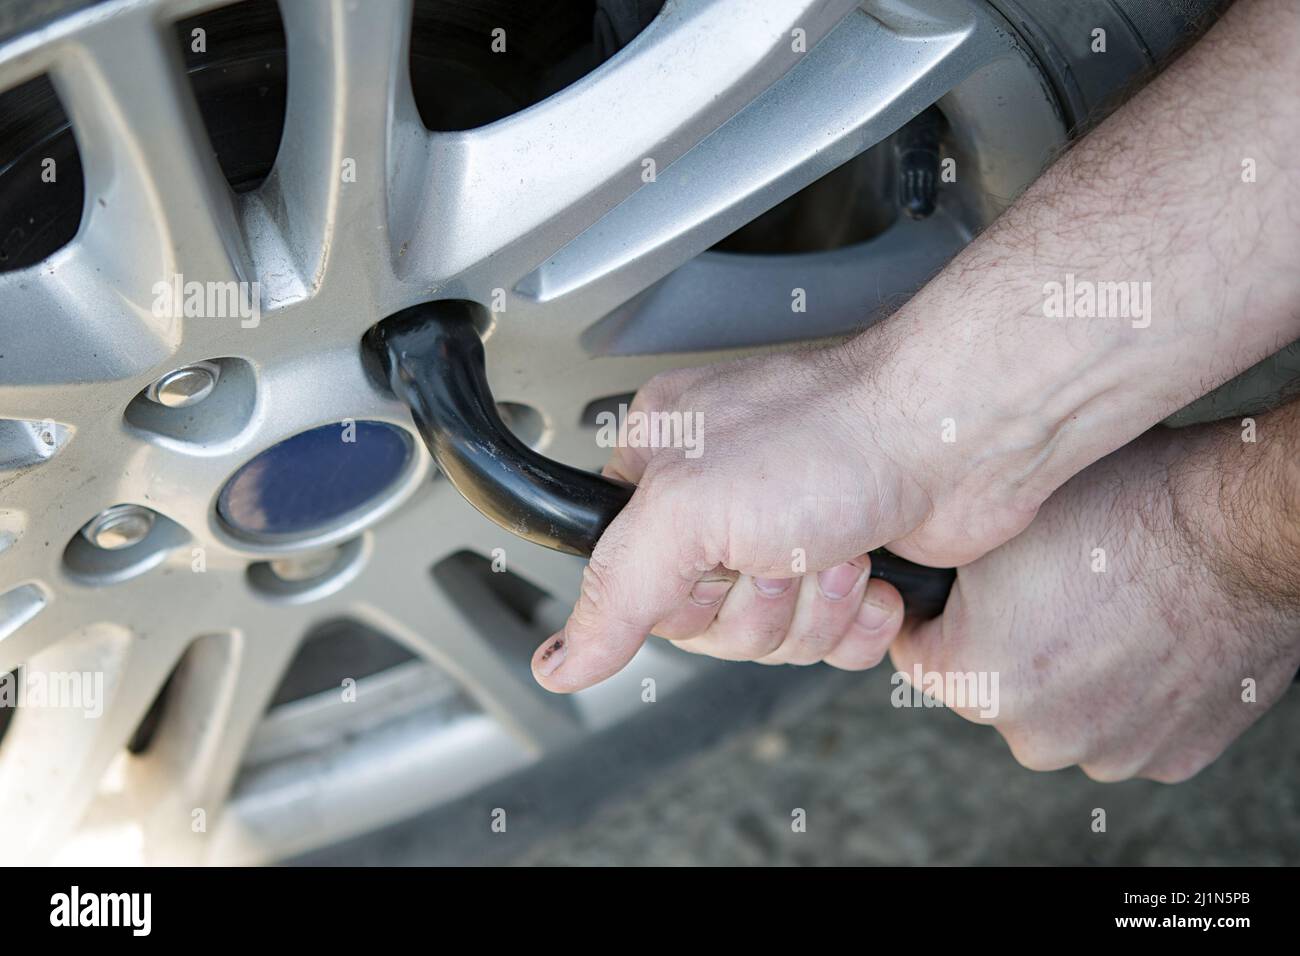 changing flat tire on the road. A close up Stock Photo